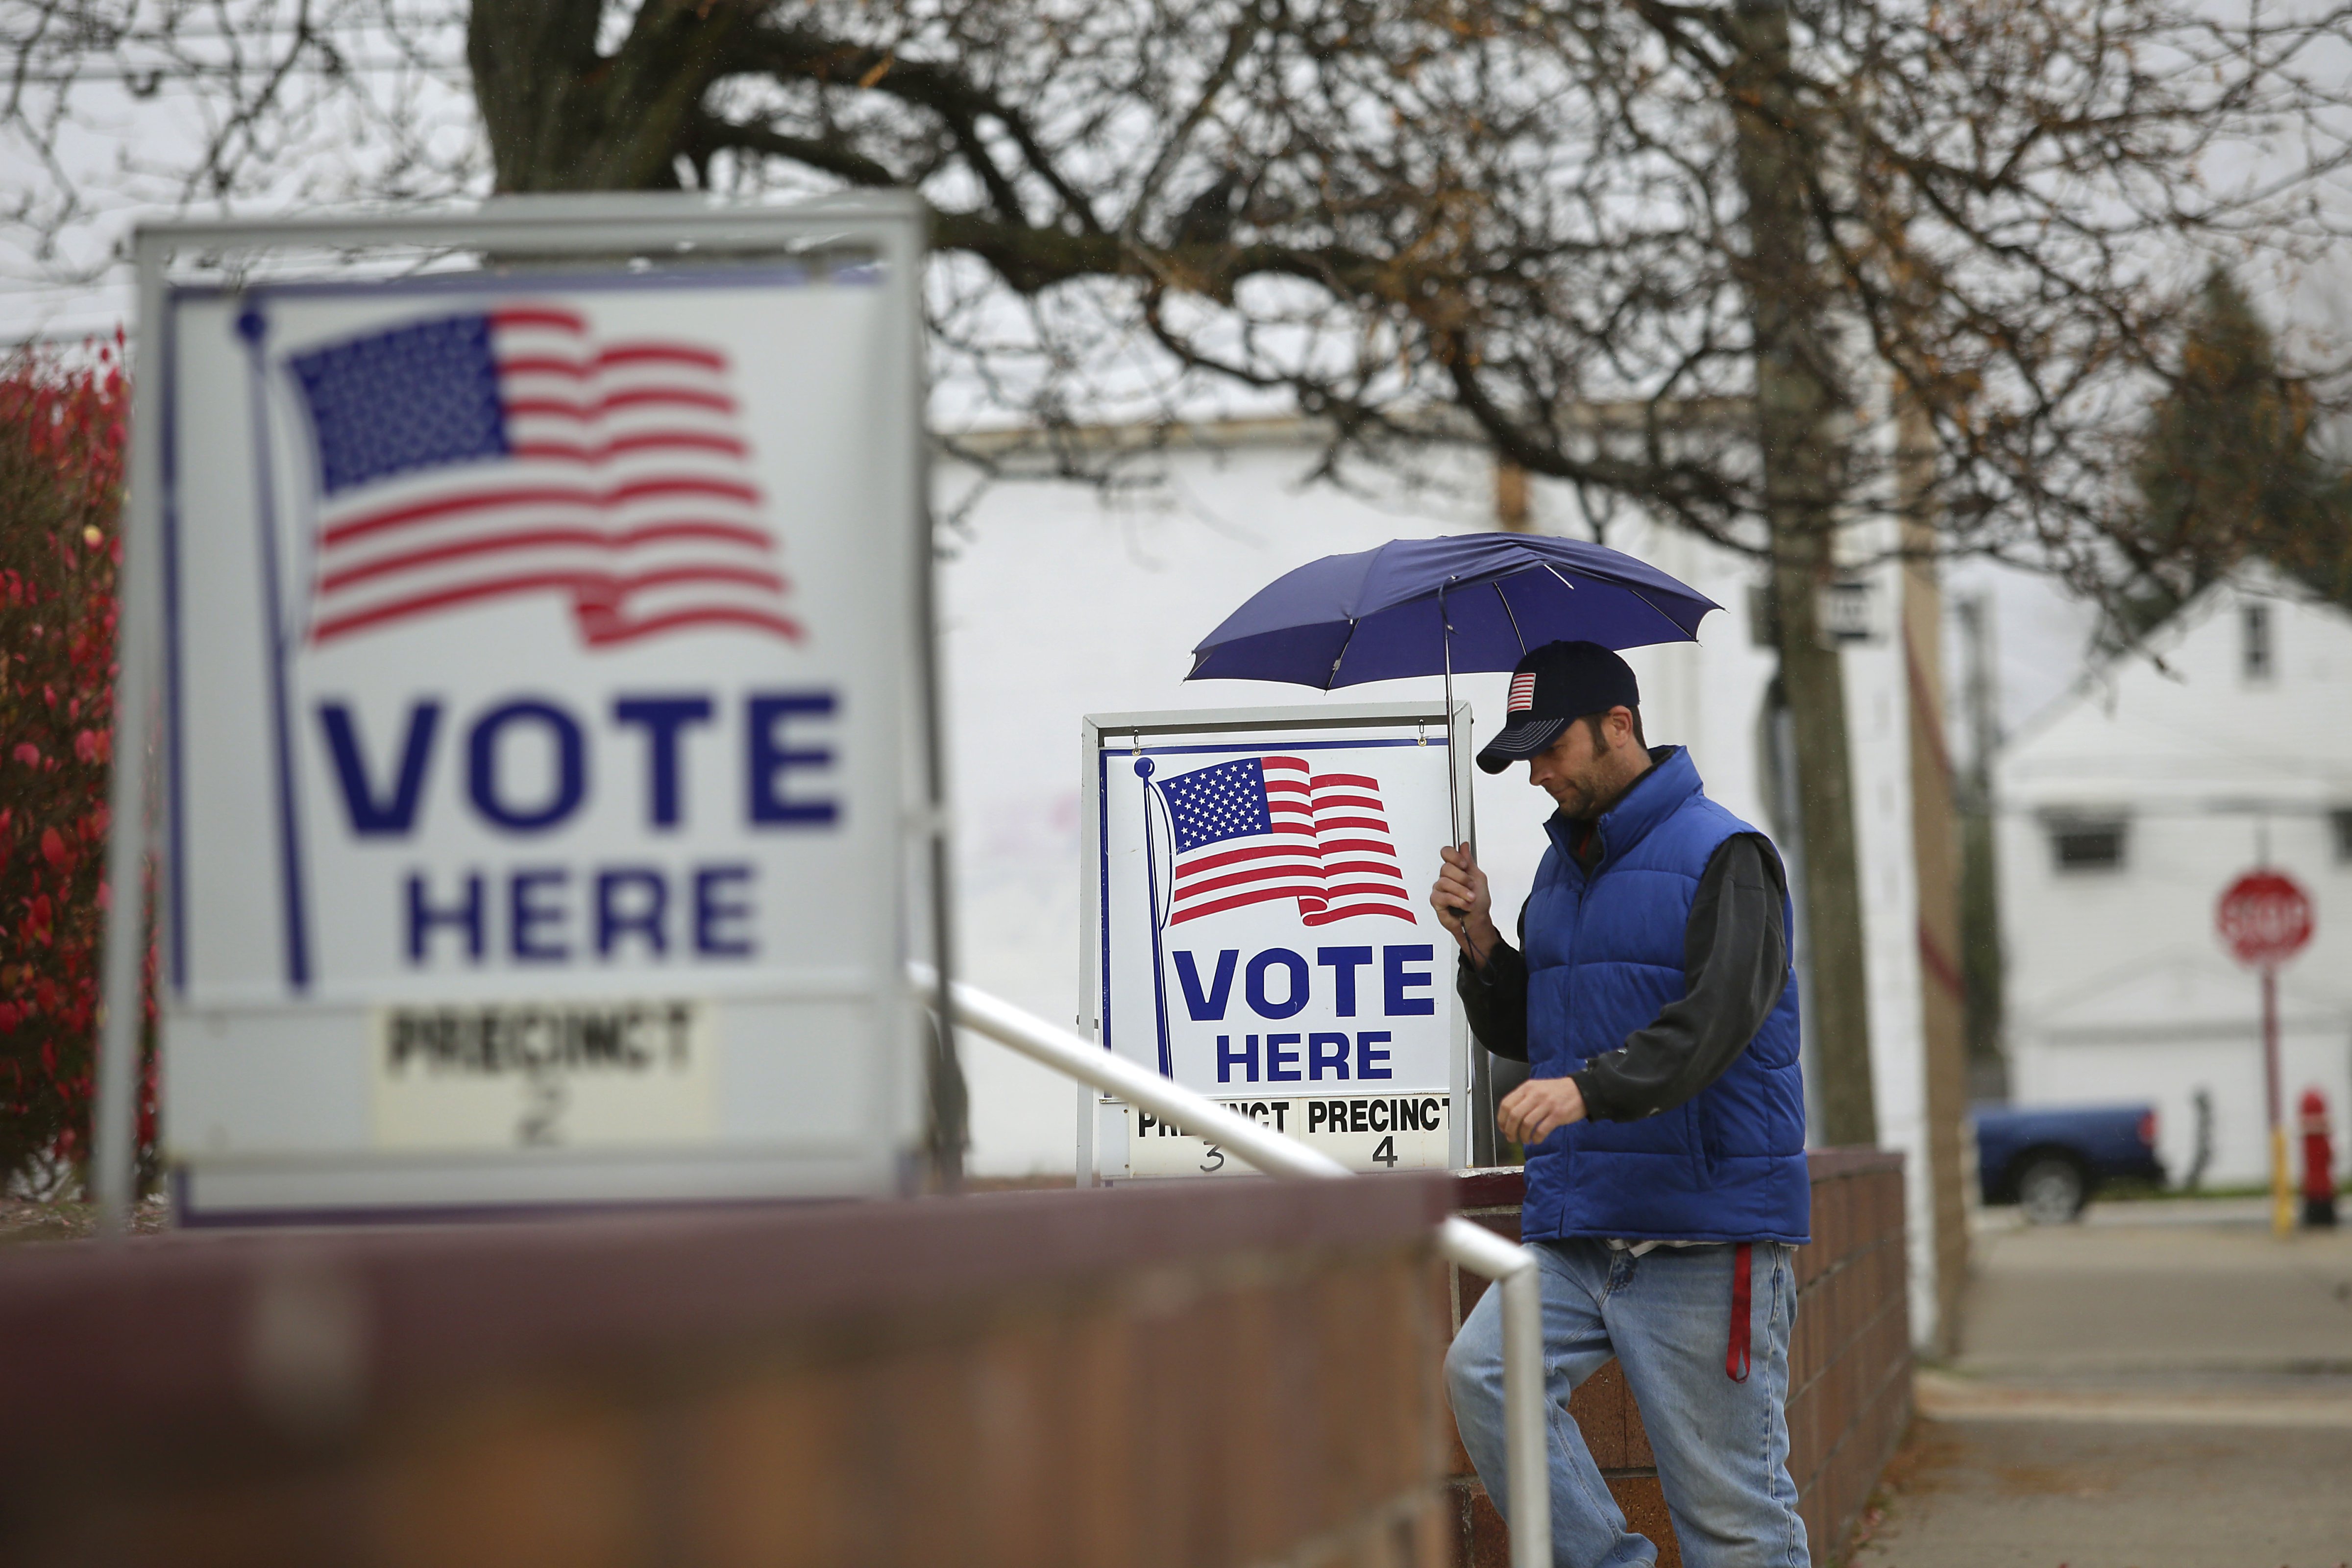 A man fills walks past voting signs displayed outside a polling station during the mid-term elections November 4, 2014 in Hamtramck, Michigan. (Joshua Lott&mdash;Getty Images)